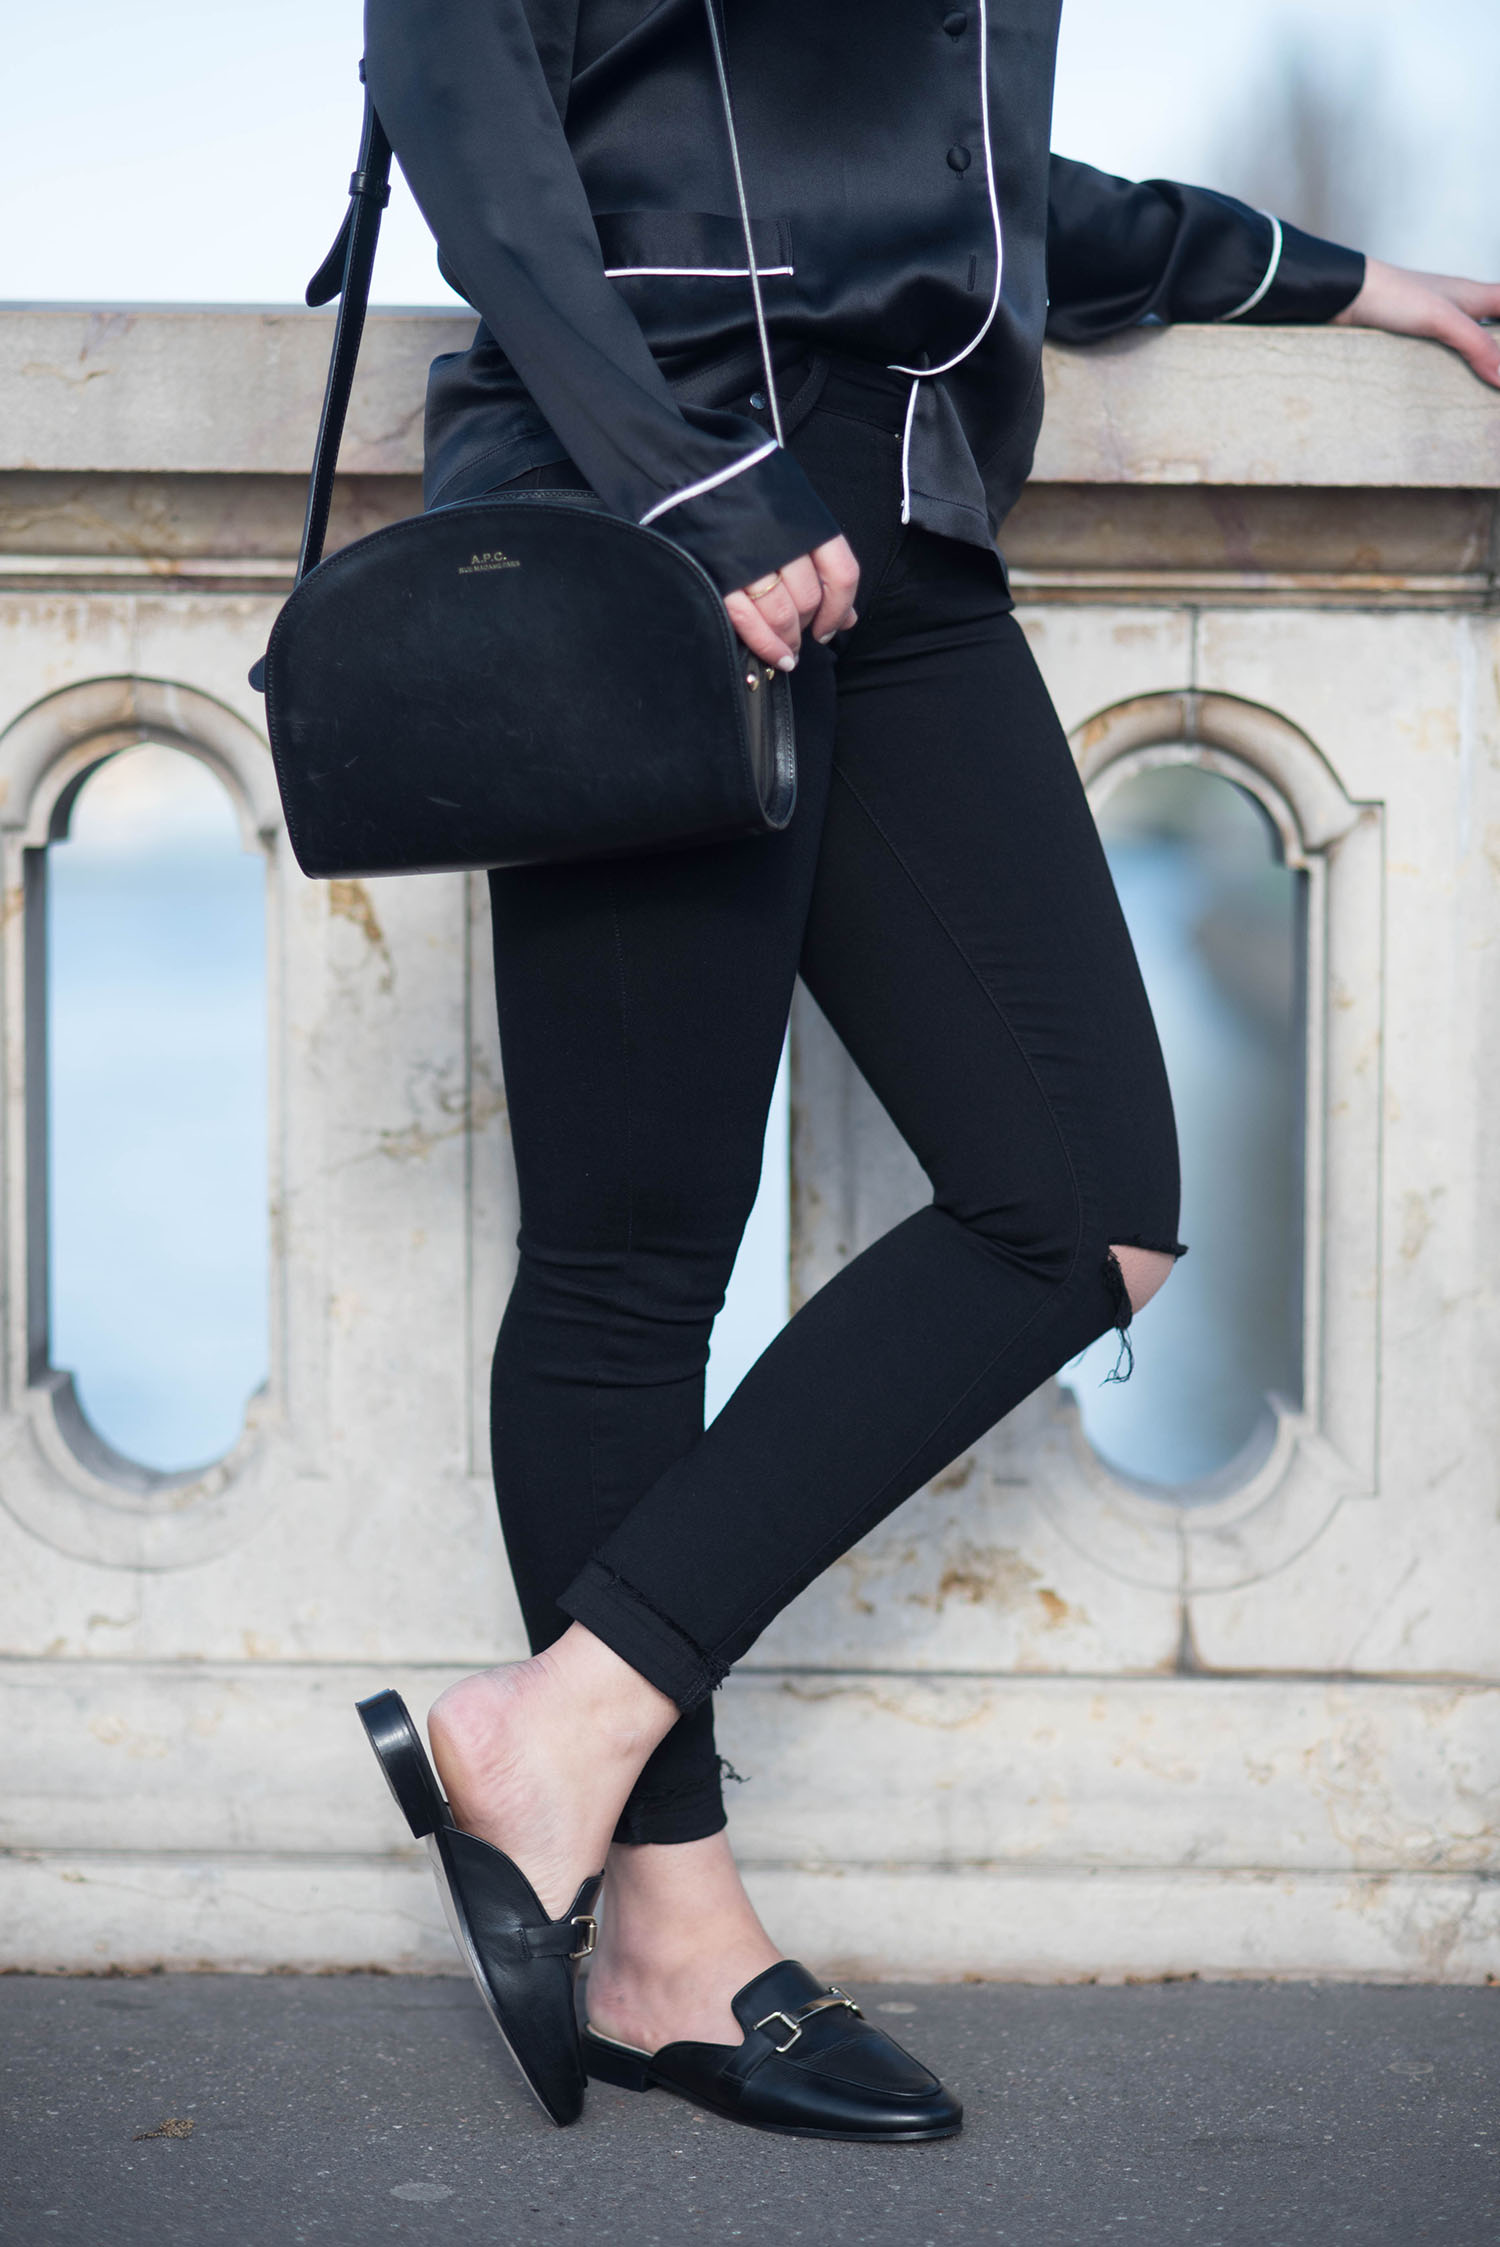 Outfit details on Winnipeg style blogger Cee Fardoe, wearing Jonak mules and Paige jeans